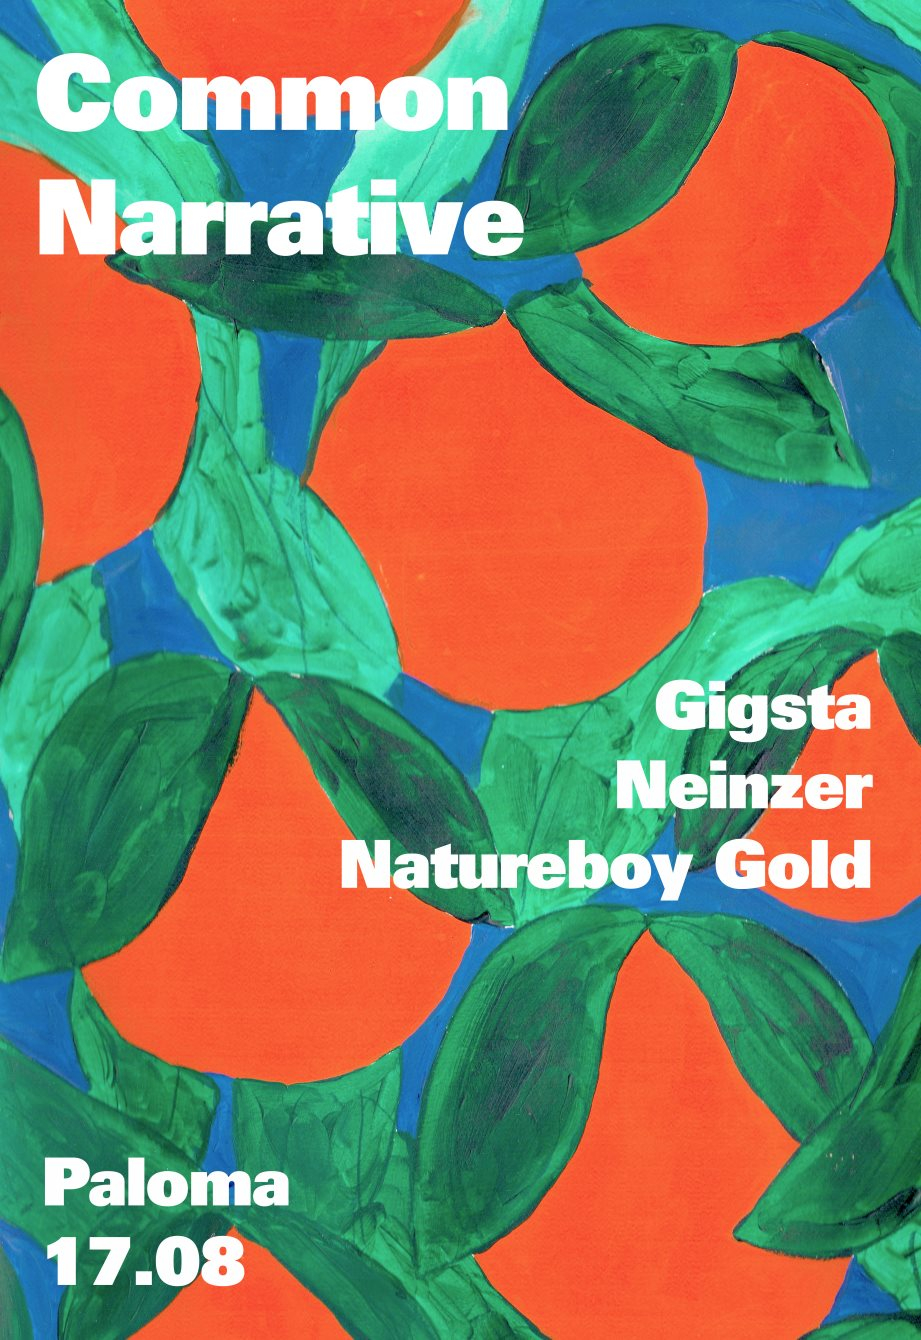 Common Narrative with Gigsta & Neinzer - Flyer front